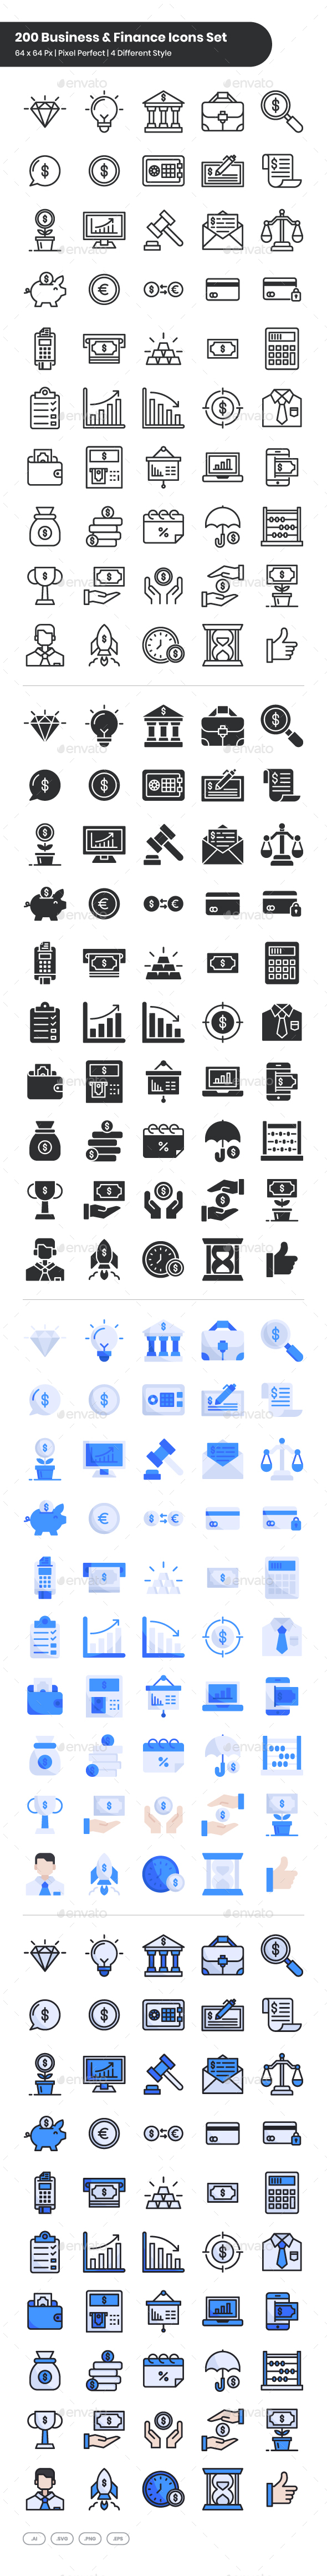 200 Business & Finance Icons Set